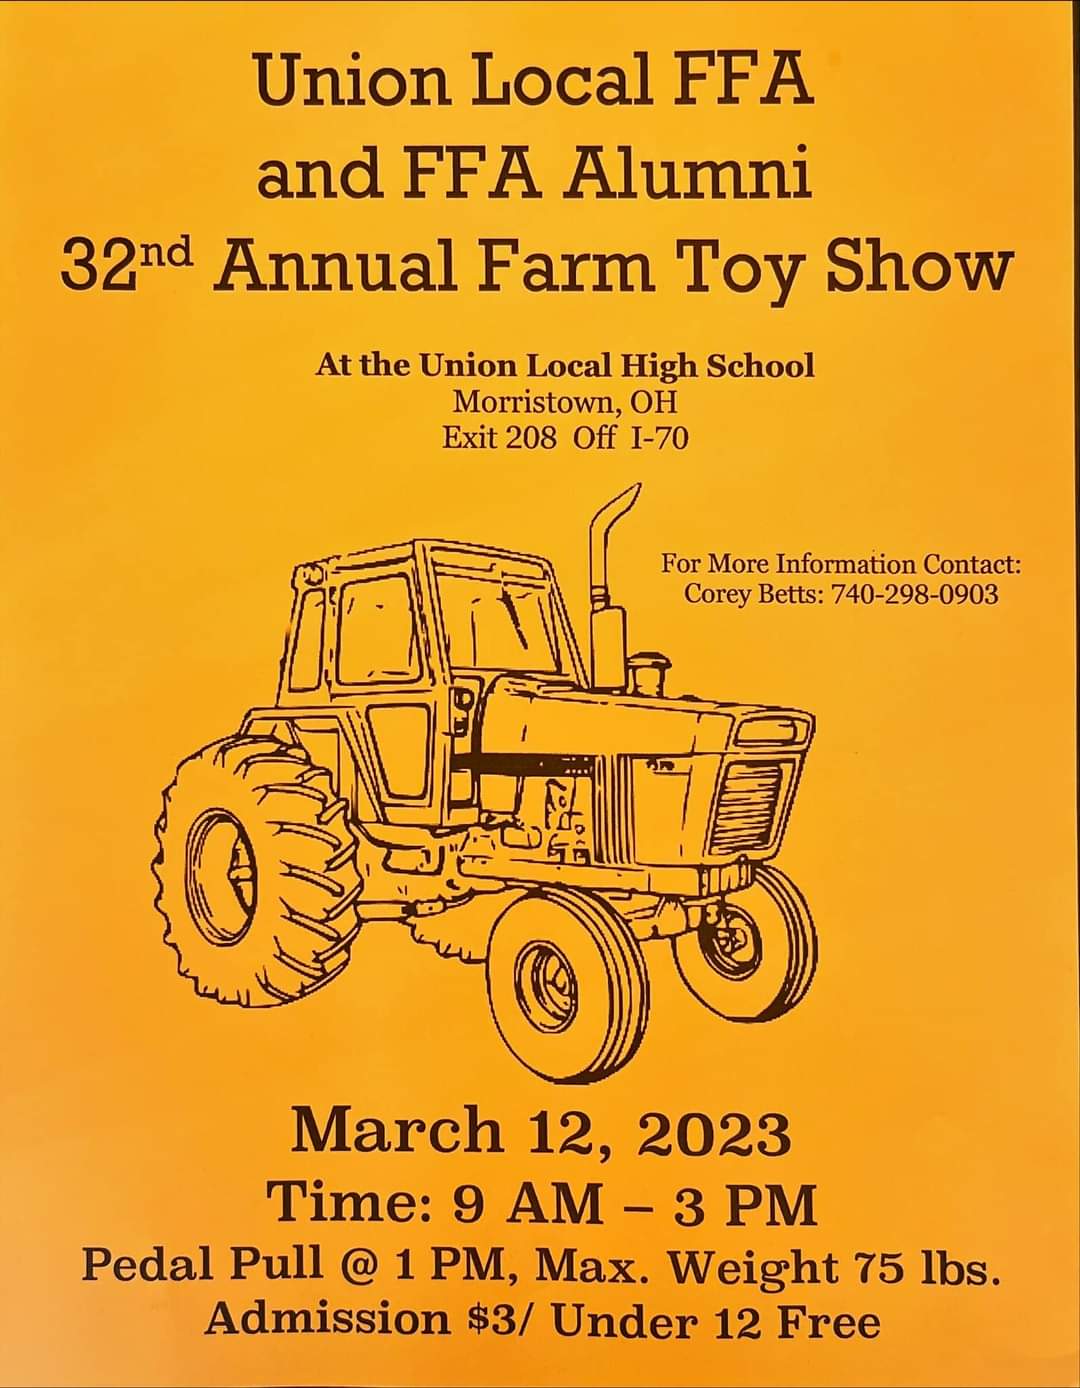 A flyer reading: Union Local FFA and FFA Alumni 32nd Annual Farm Toy Show at the Union Local High School Morristown, OH Exit 208, Off I-70. For more information contact Corey Betts: 740-298-0903 March 12, 2023 Time: 9 a.m. to 3 p.m Pedal pull @ 1 pm Max weight 75 lbs Admission $3, Under 12 free.